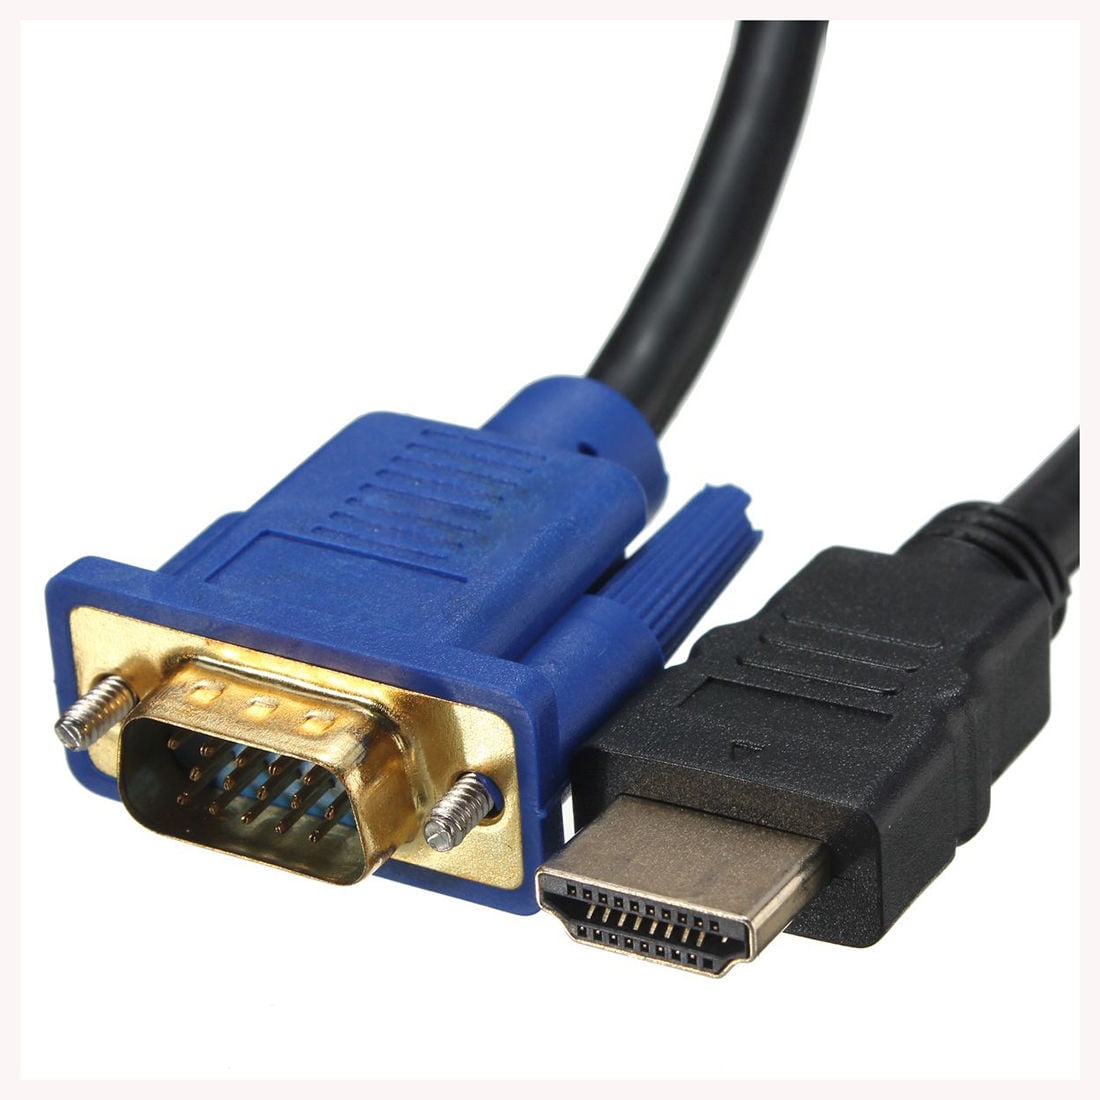 BLUE ELF HDMI to VGA Adapter Cable 6ft/1.8m Gold-Plated 1080P HDMI Male to  VGA Male Active Video Converter Cord for Notebook PC DVD Player Laptop TV